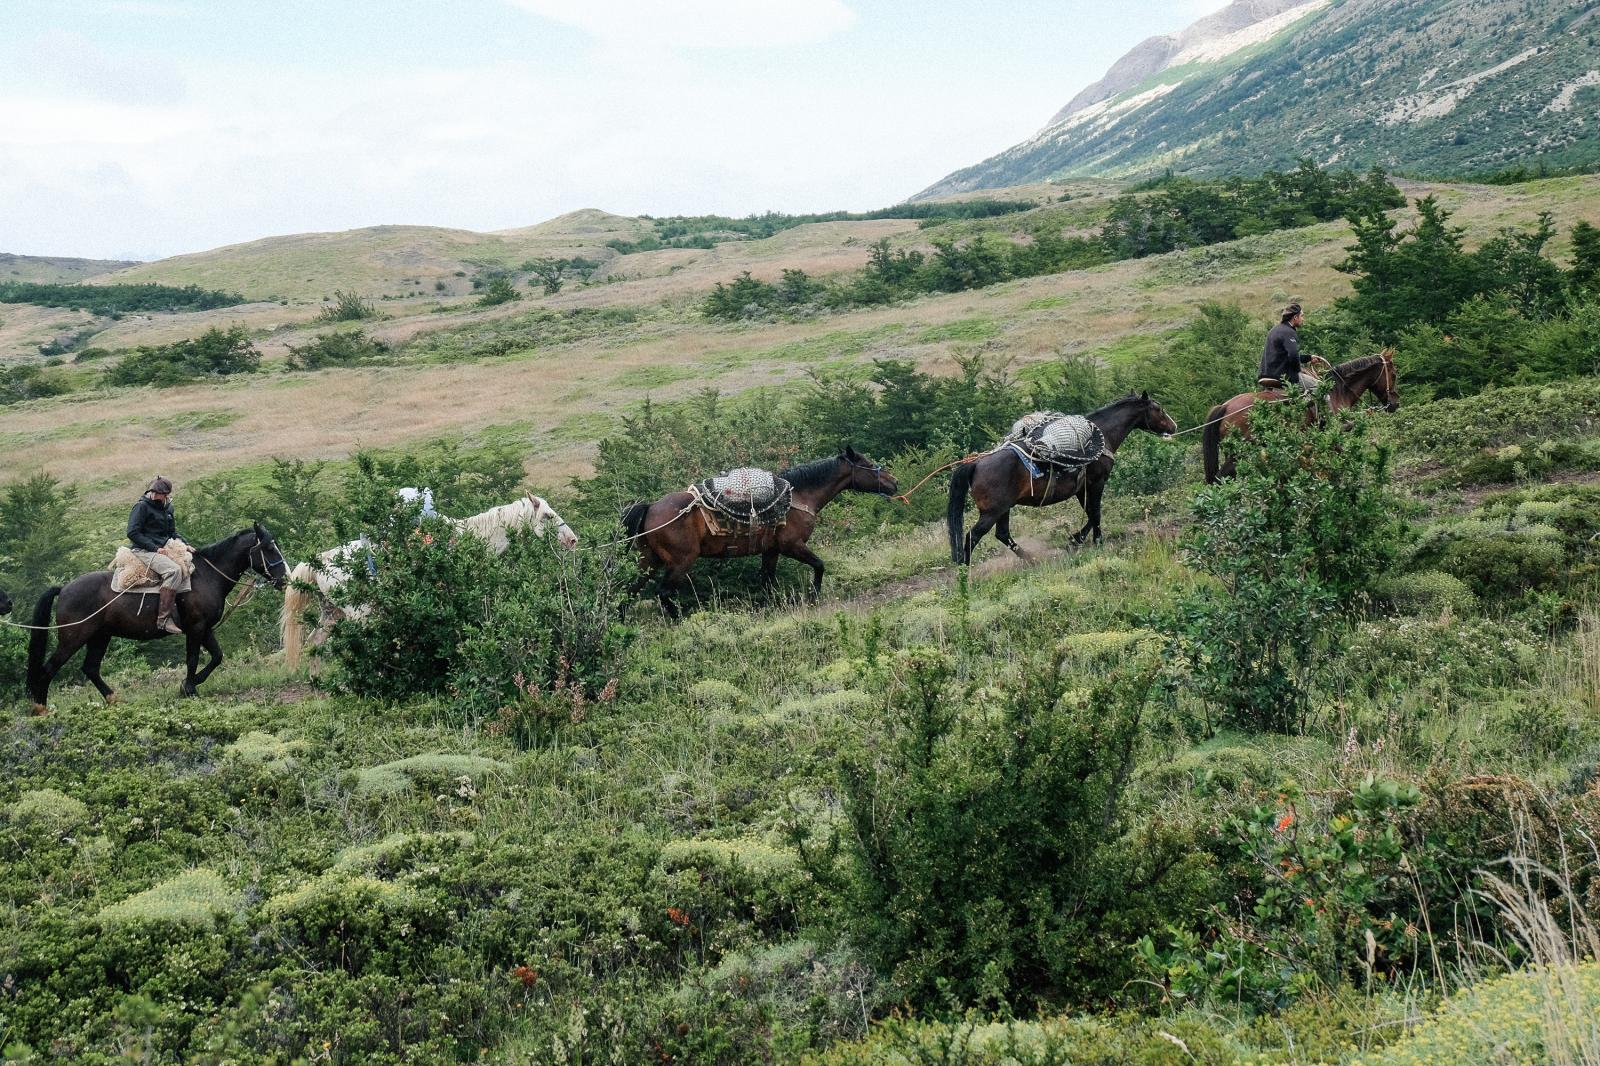 Torres del Paine, horses | Buy this image